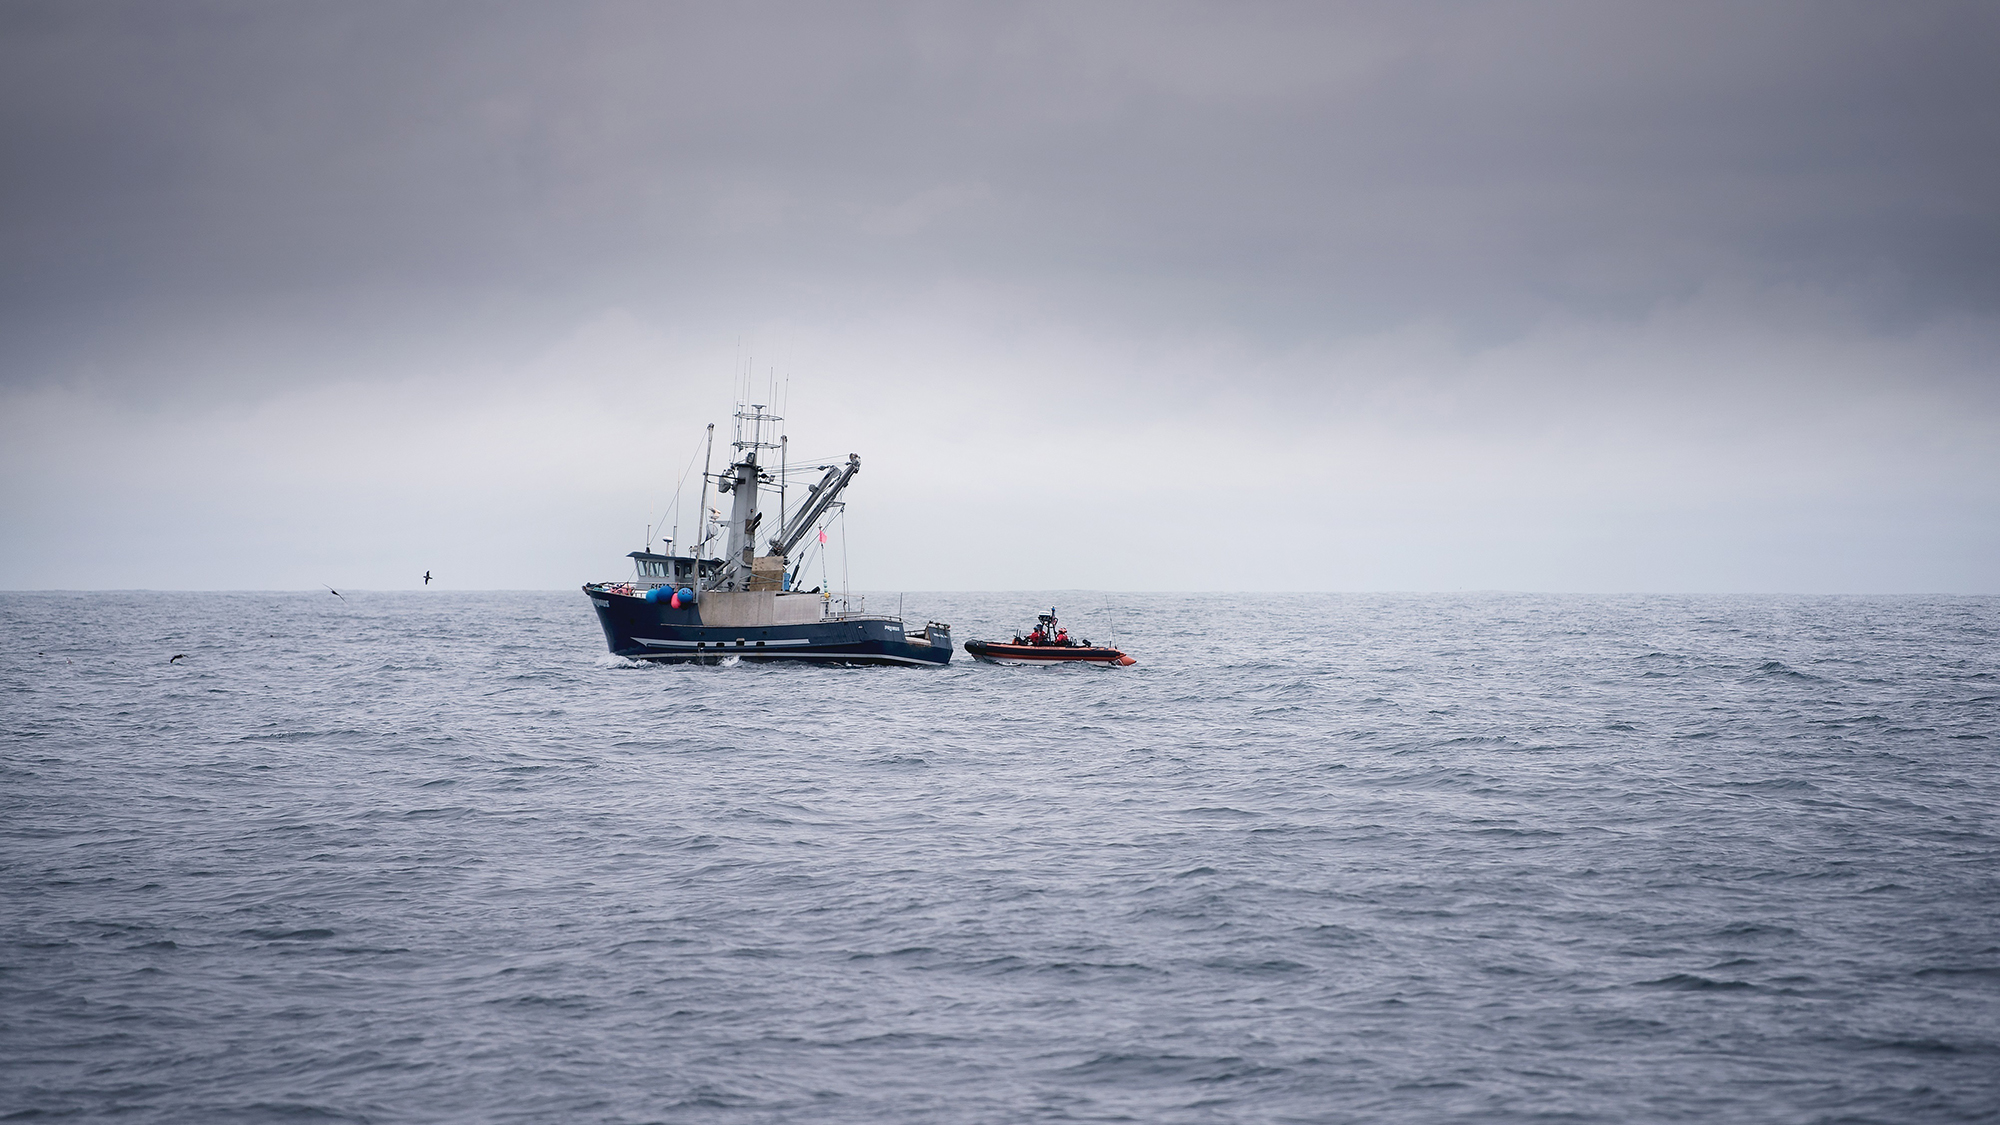 The Cutter Douglas Munro and crew searching for illegal, unreported, and unregulated fishing activity including high seas driftnet fishing.